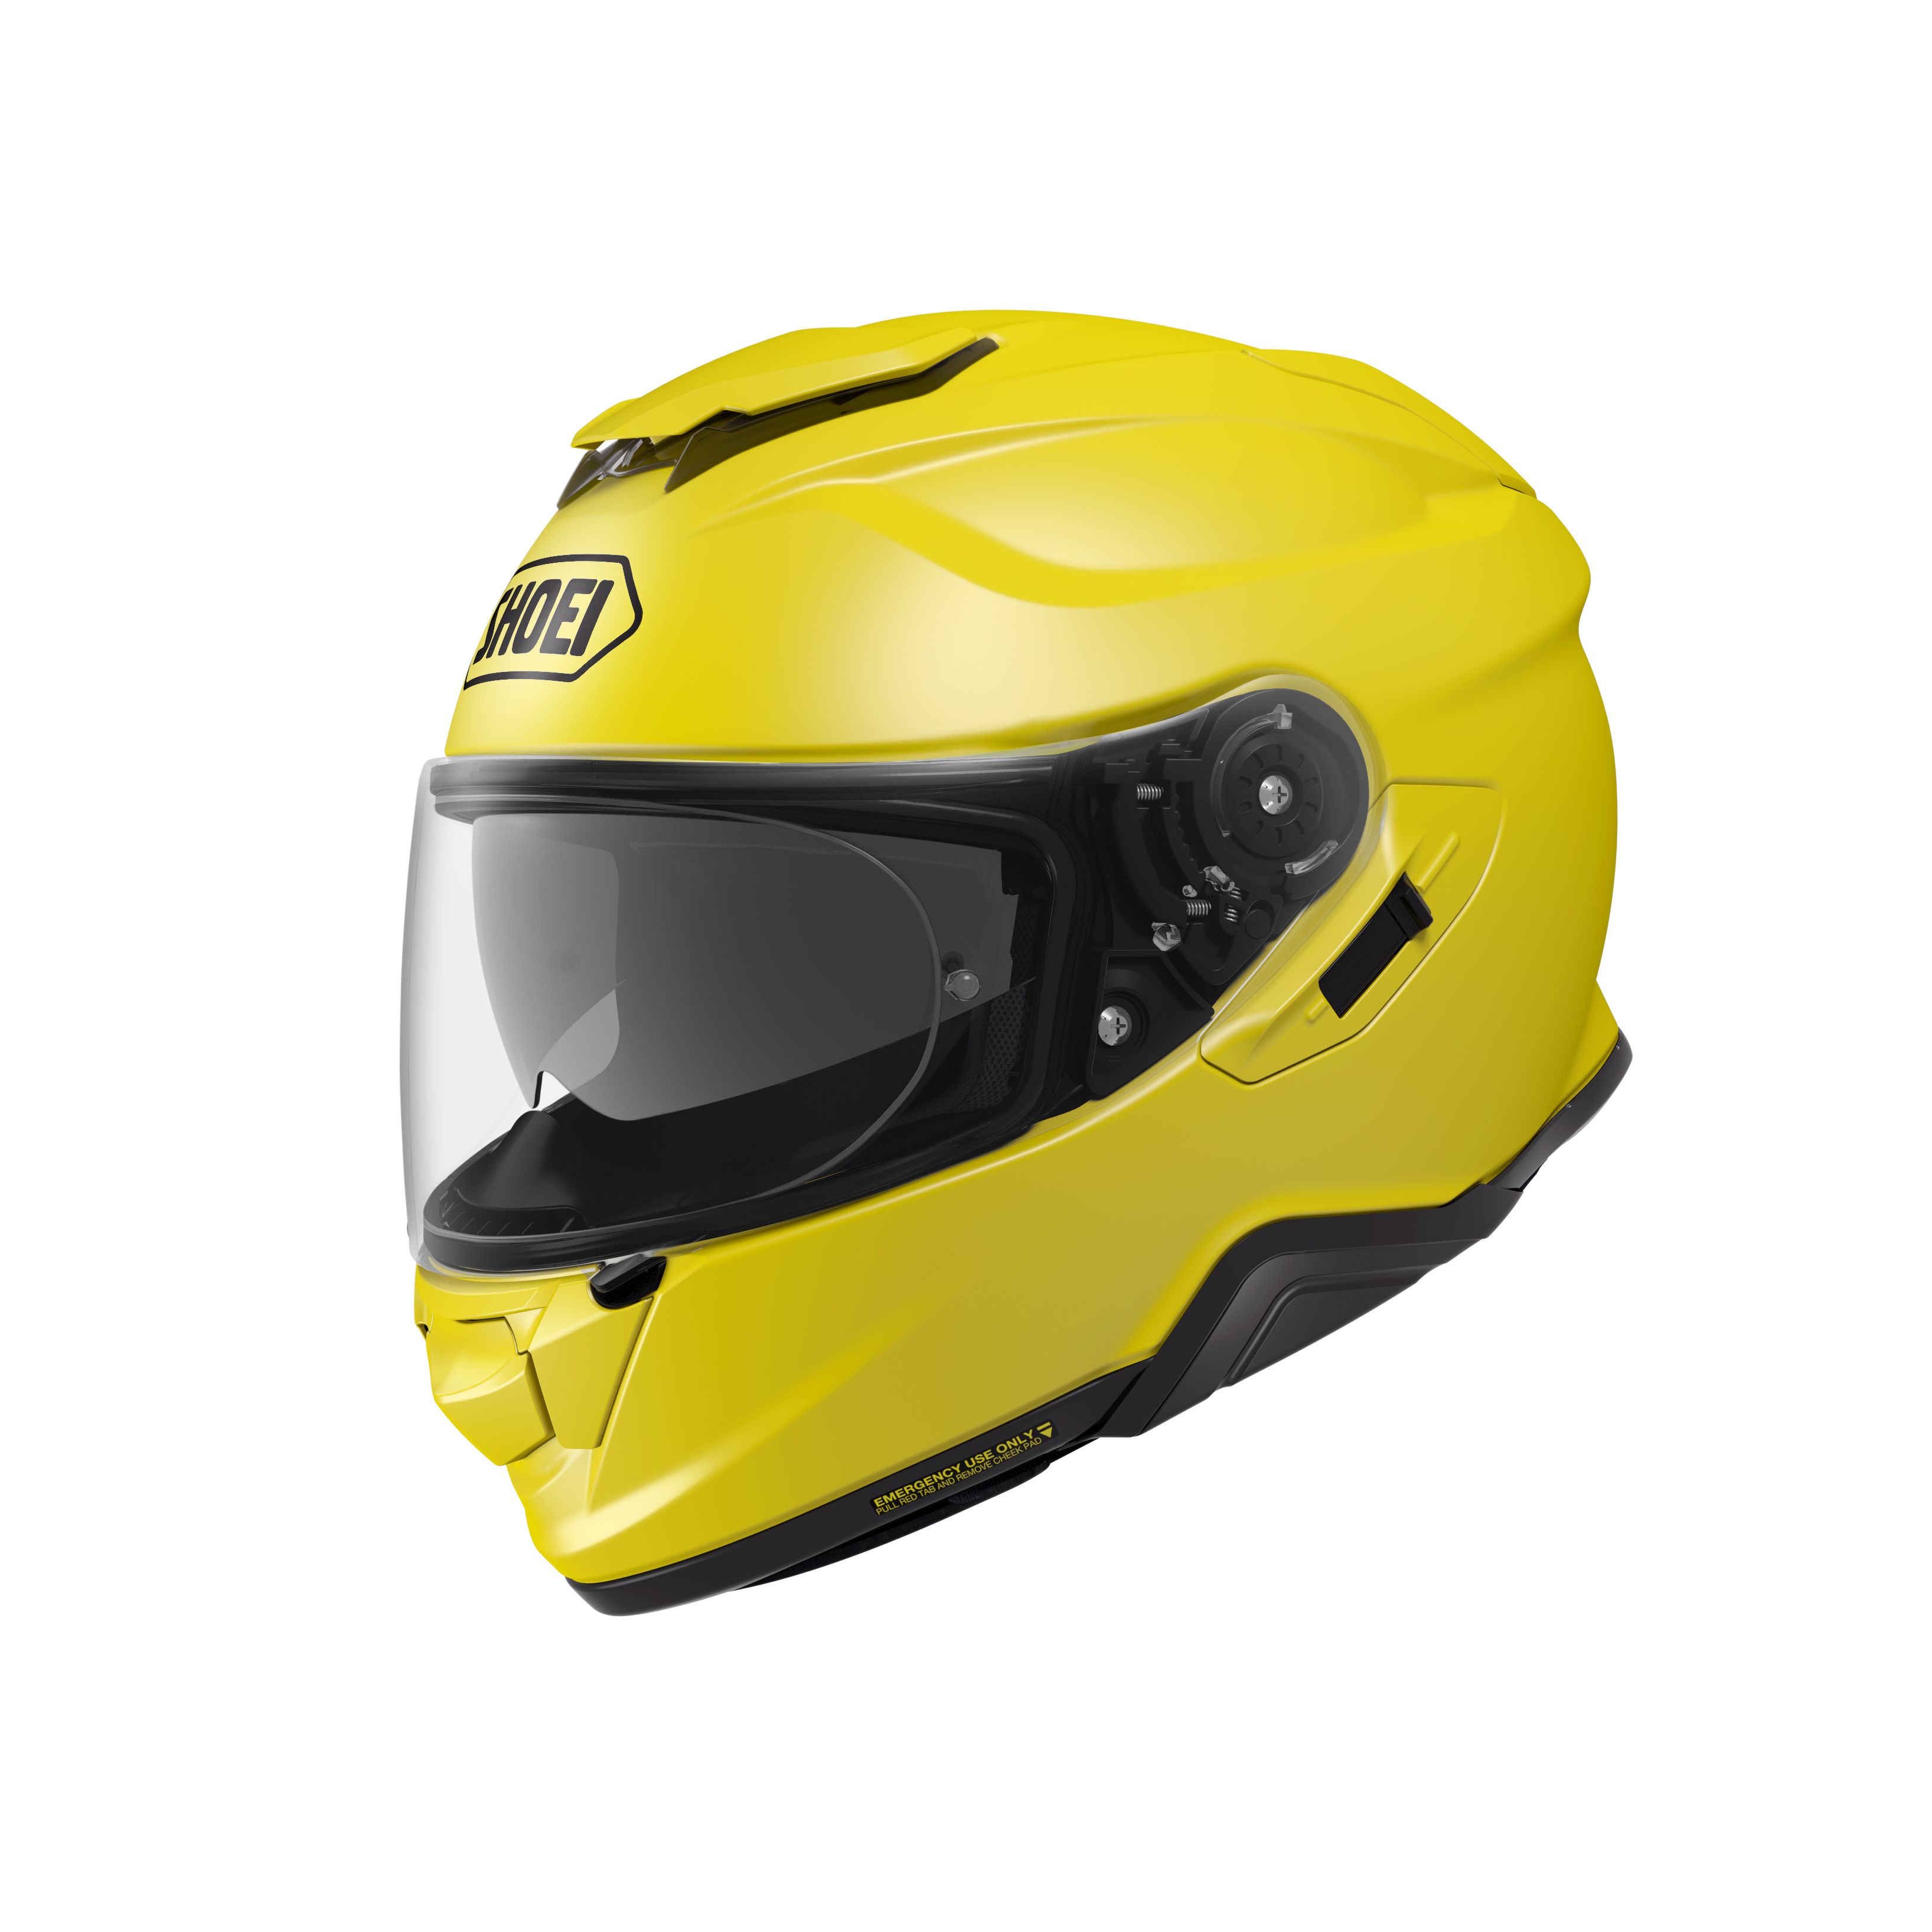 Banyan Inquire Mottle Shoei GT Air 2 - Brilliant Yellow | Two Wheel Centre | FREE UK DELIVERY